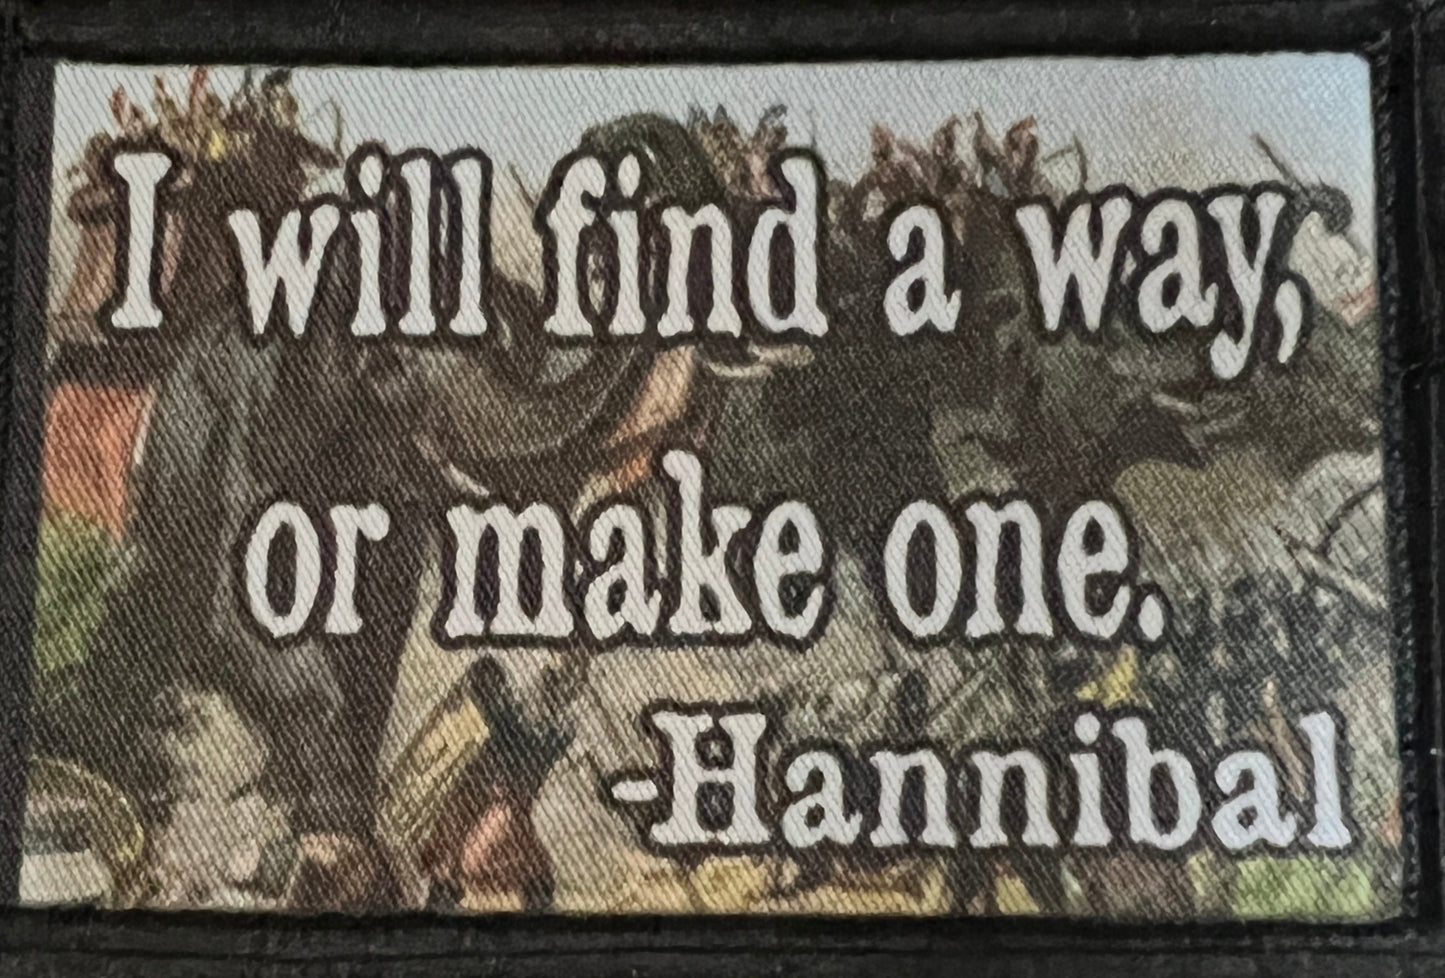 Hannibal Quote "I Will Find a Way or Make One" Morale Patch Morale Patches Redheaded T Shirts 